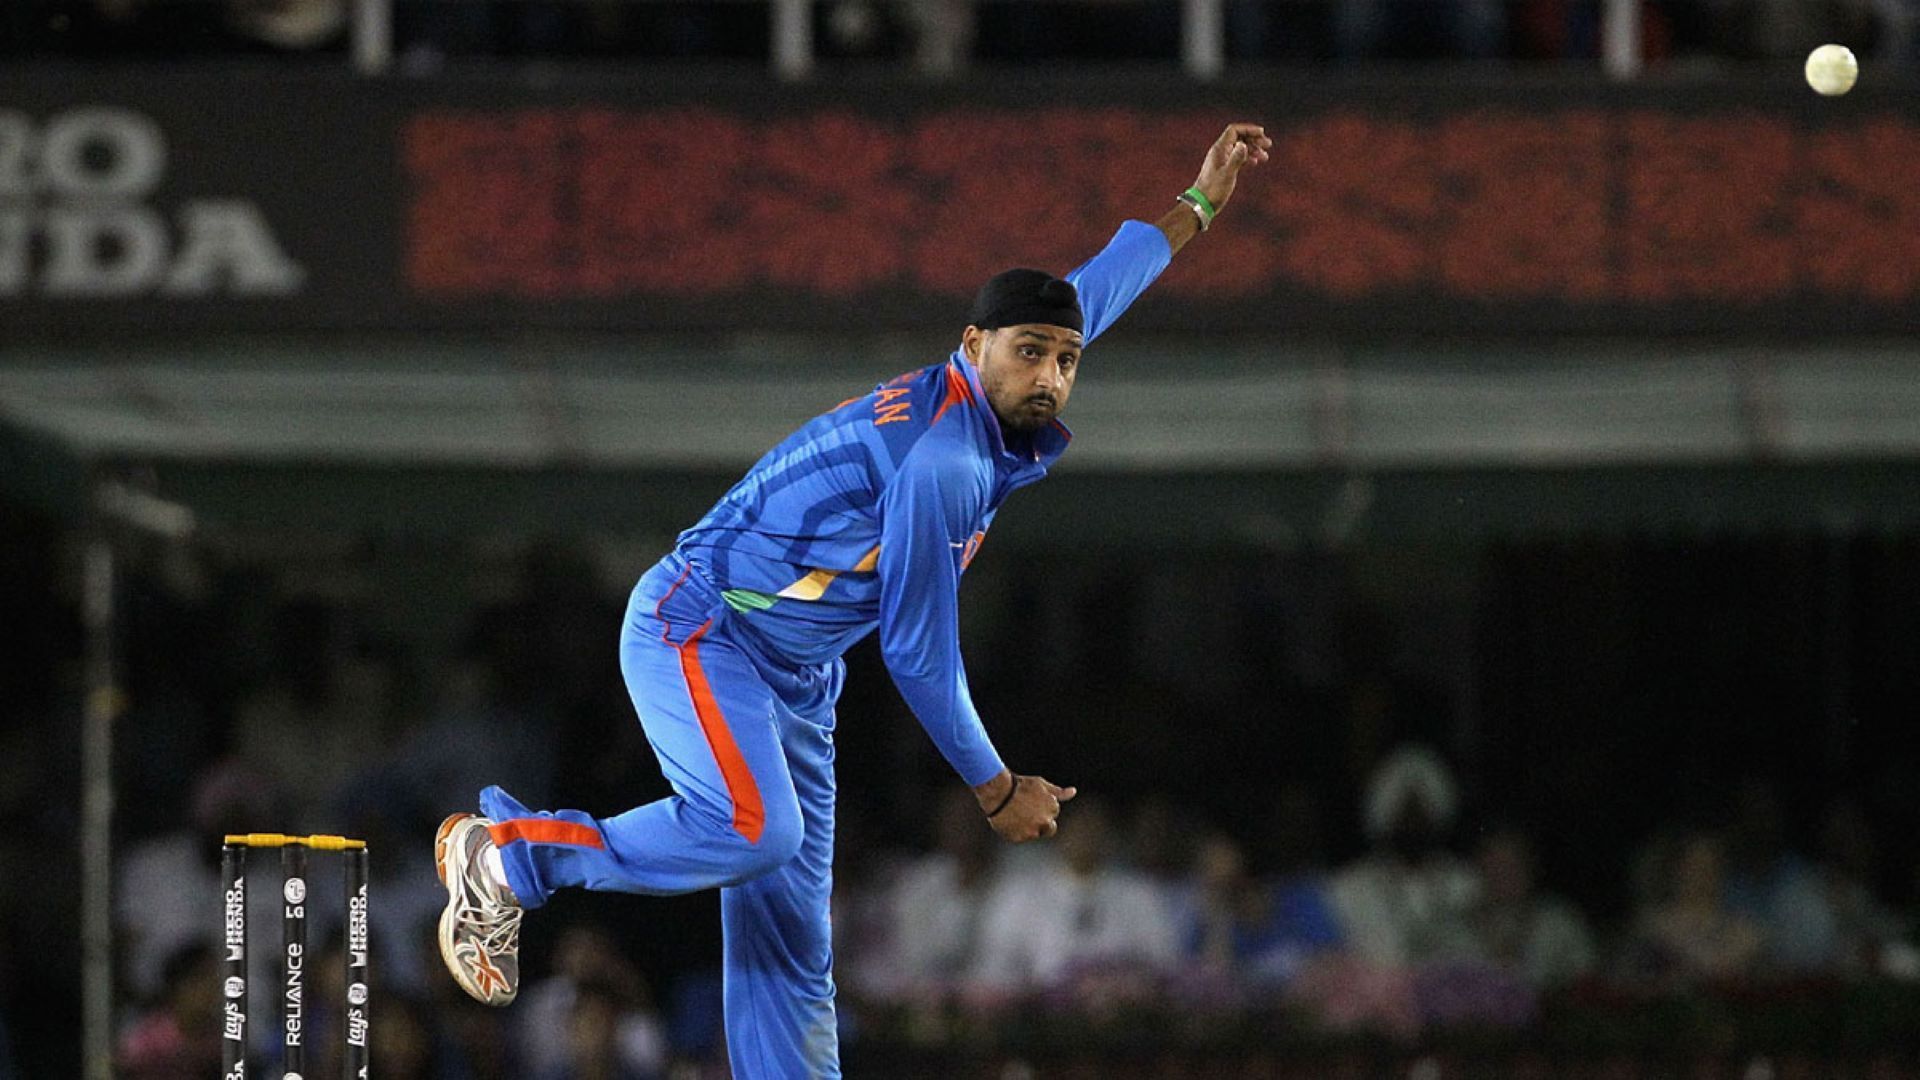 Harbhajan Singh was a vital cog in the Indian setup for several years.